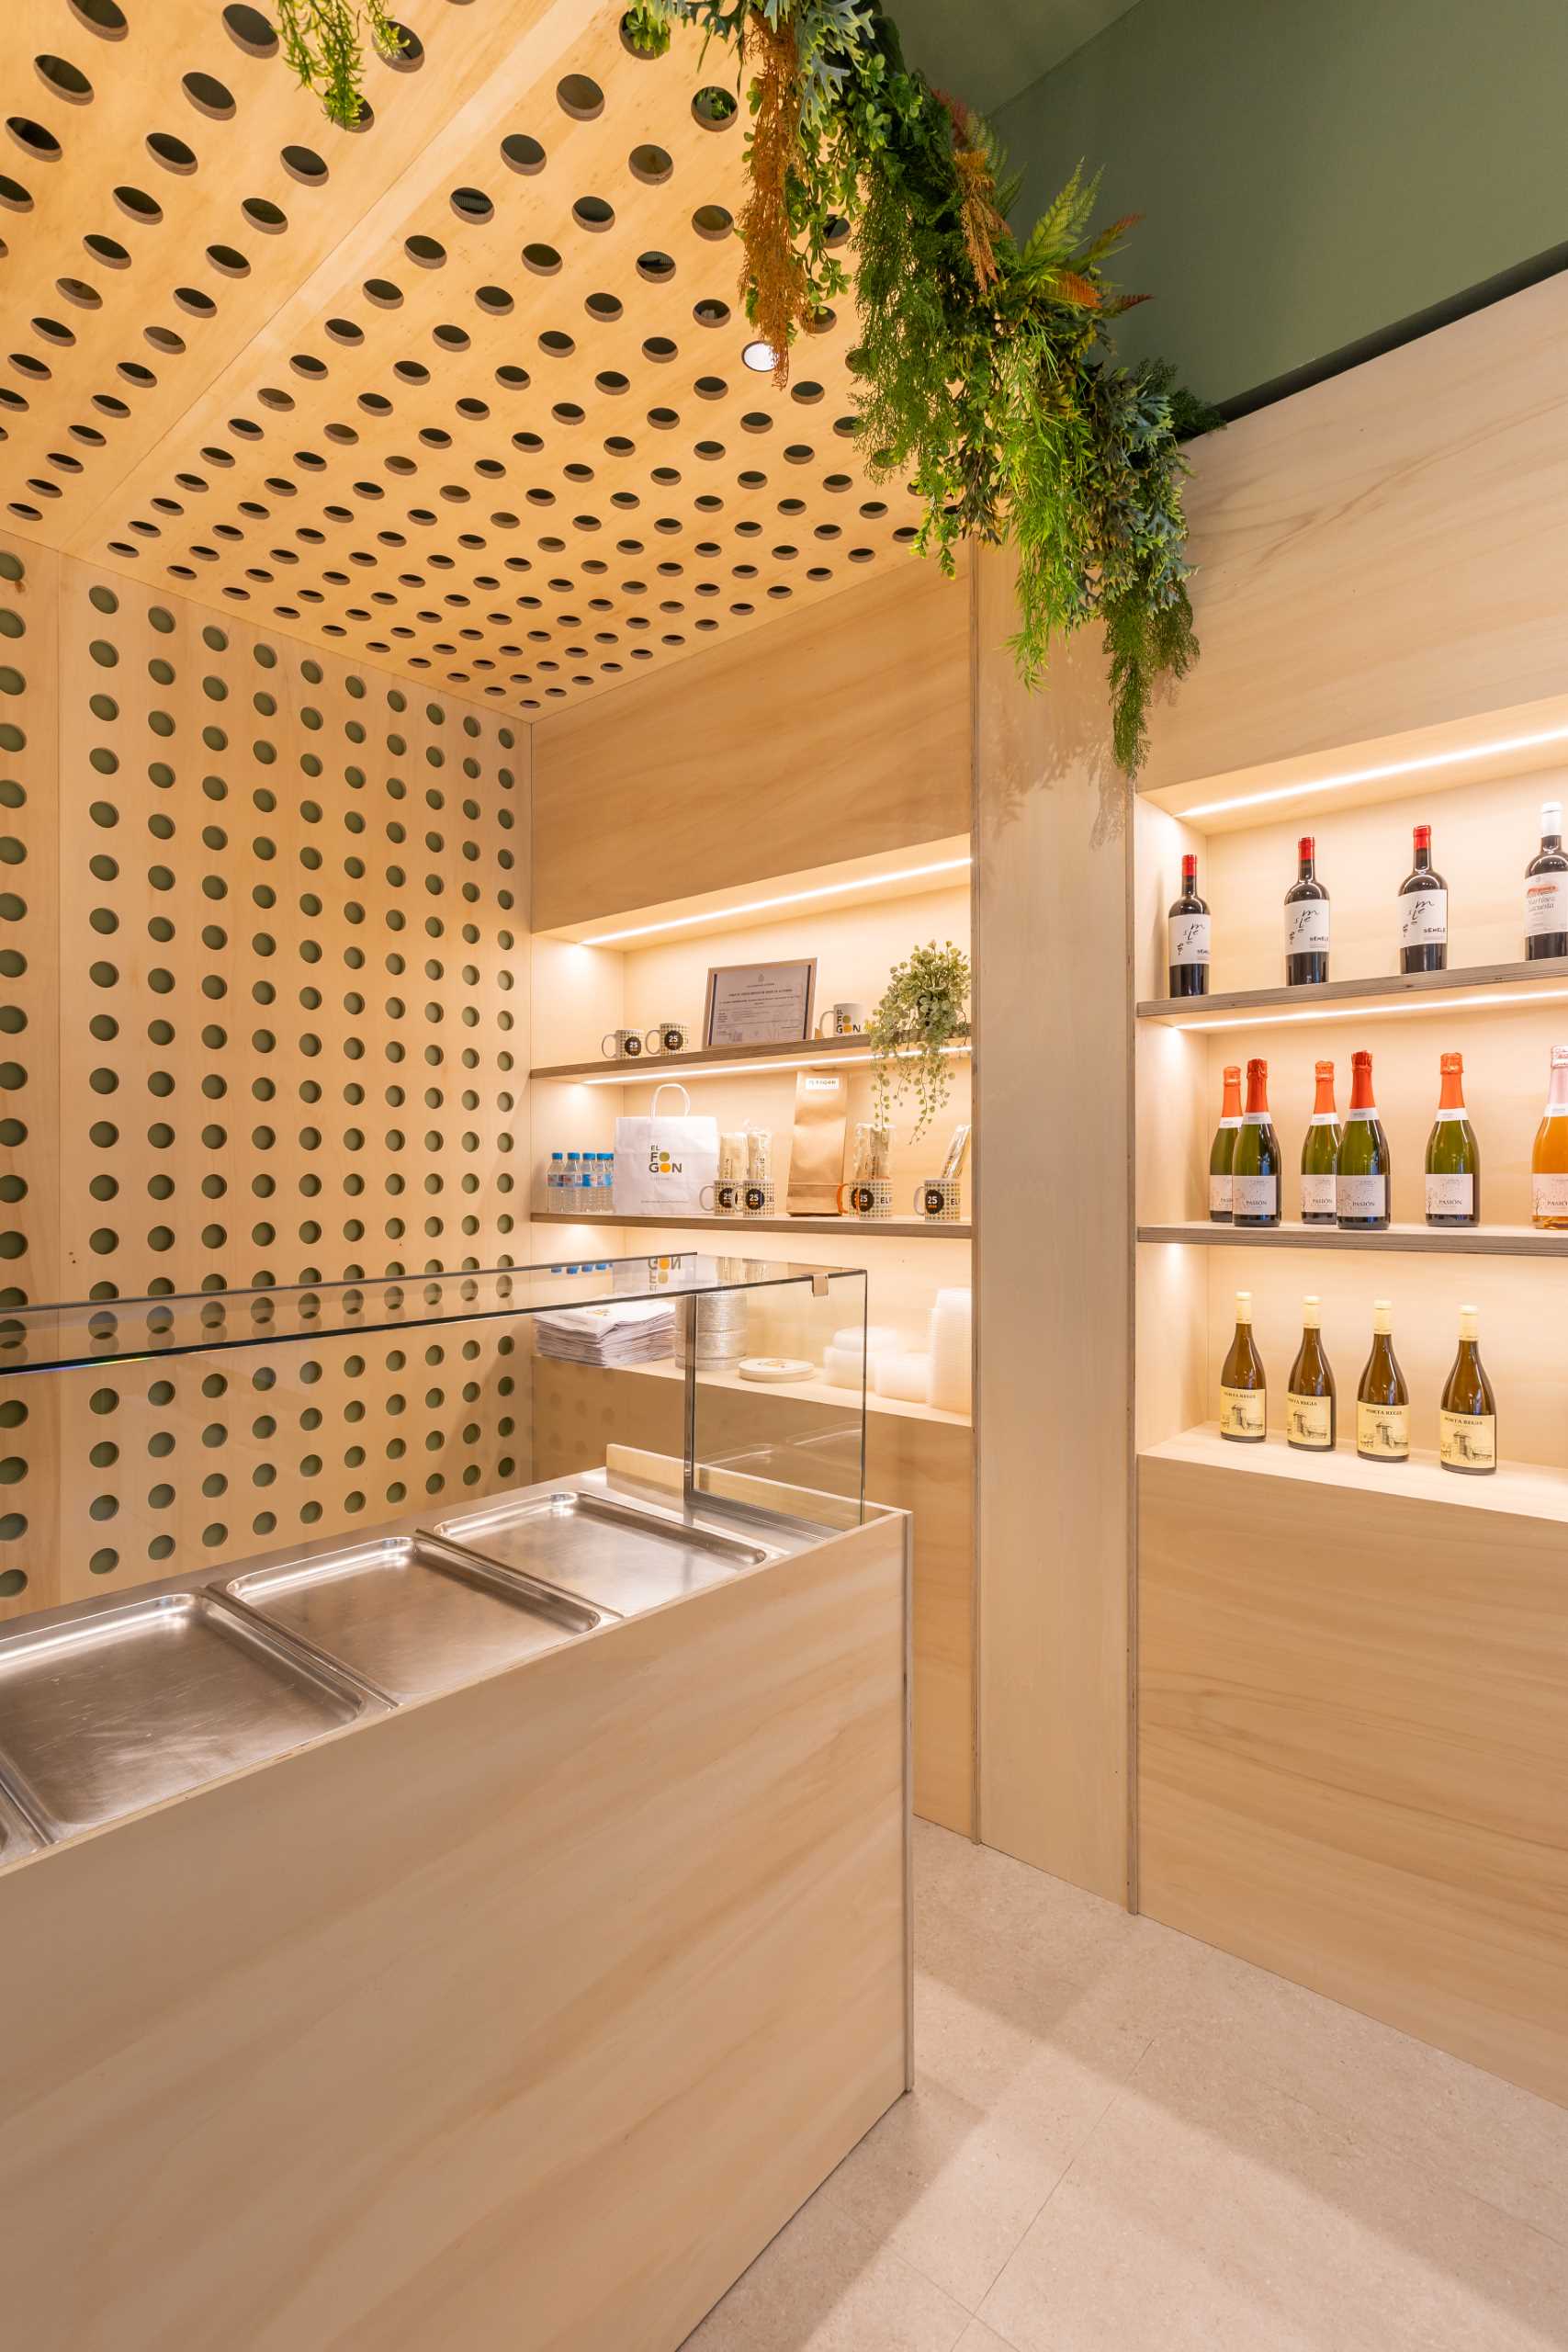 A modern takeaway shop with perforated wood panels, plants, and shelving with LED lighting.